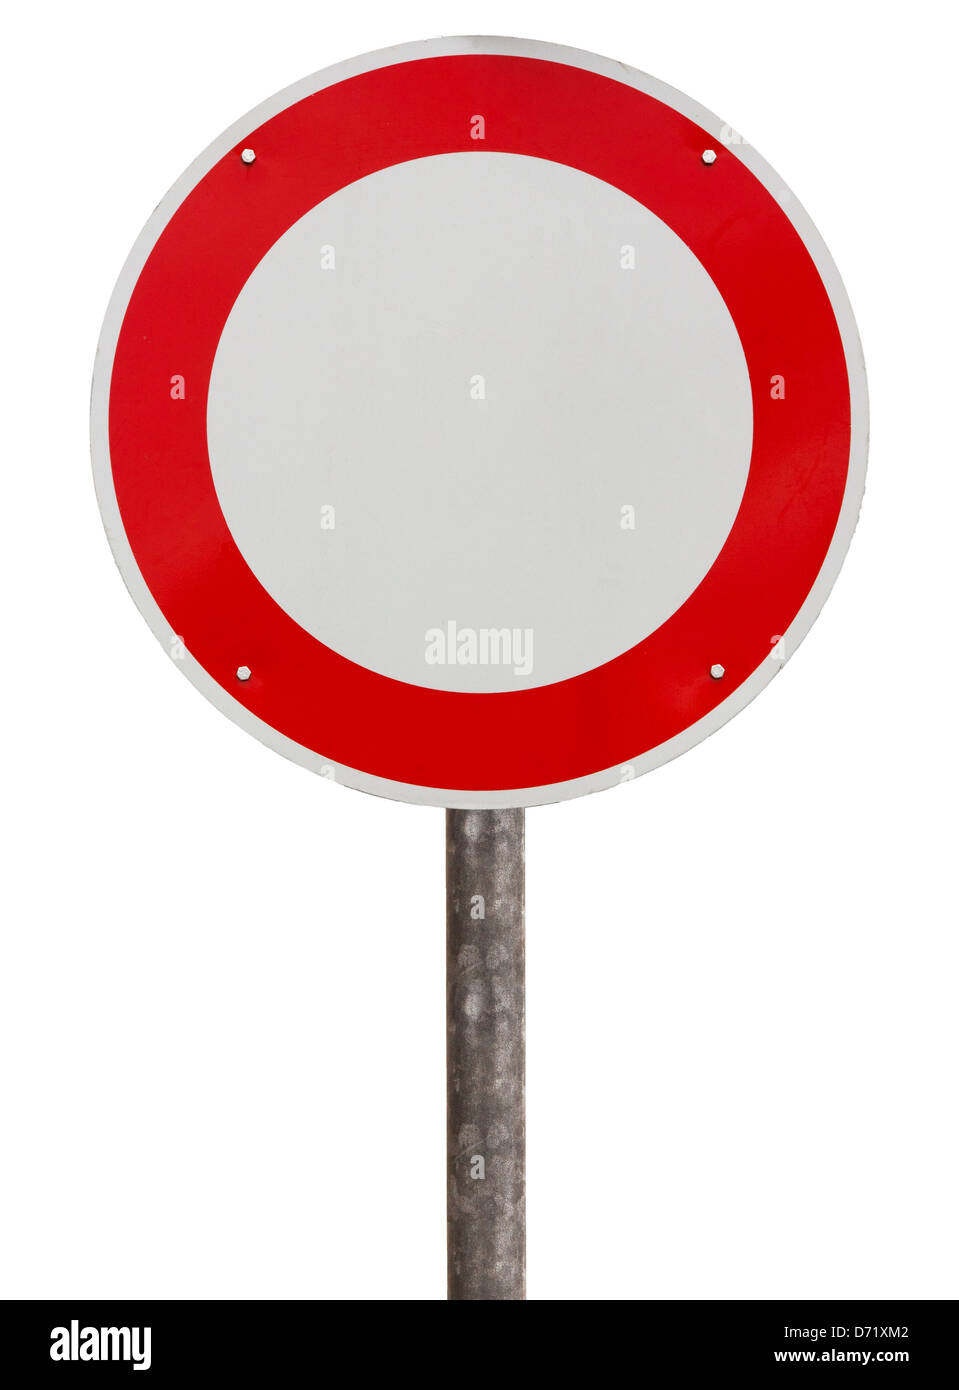 No vehicles traffic sign against white background Stock Photo